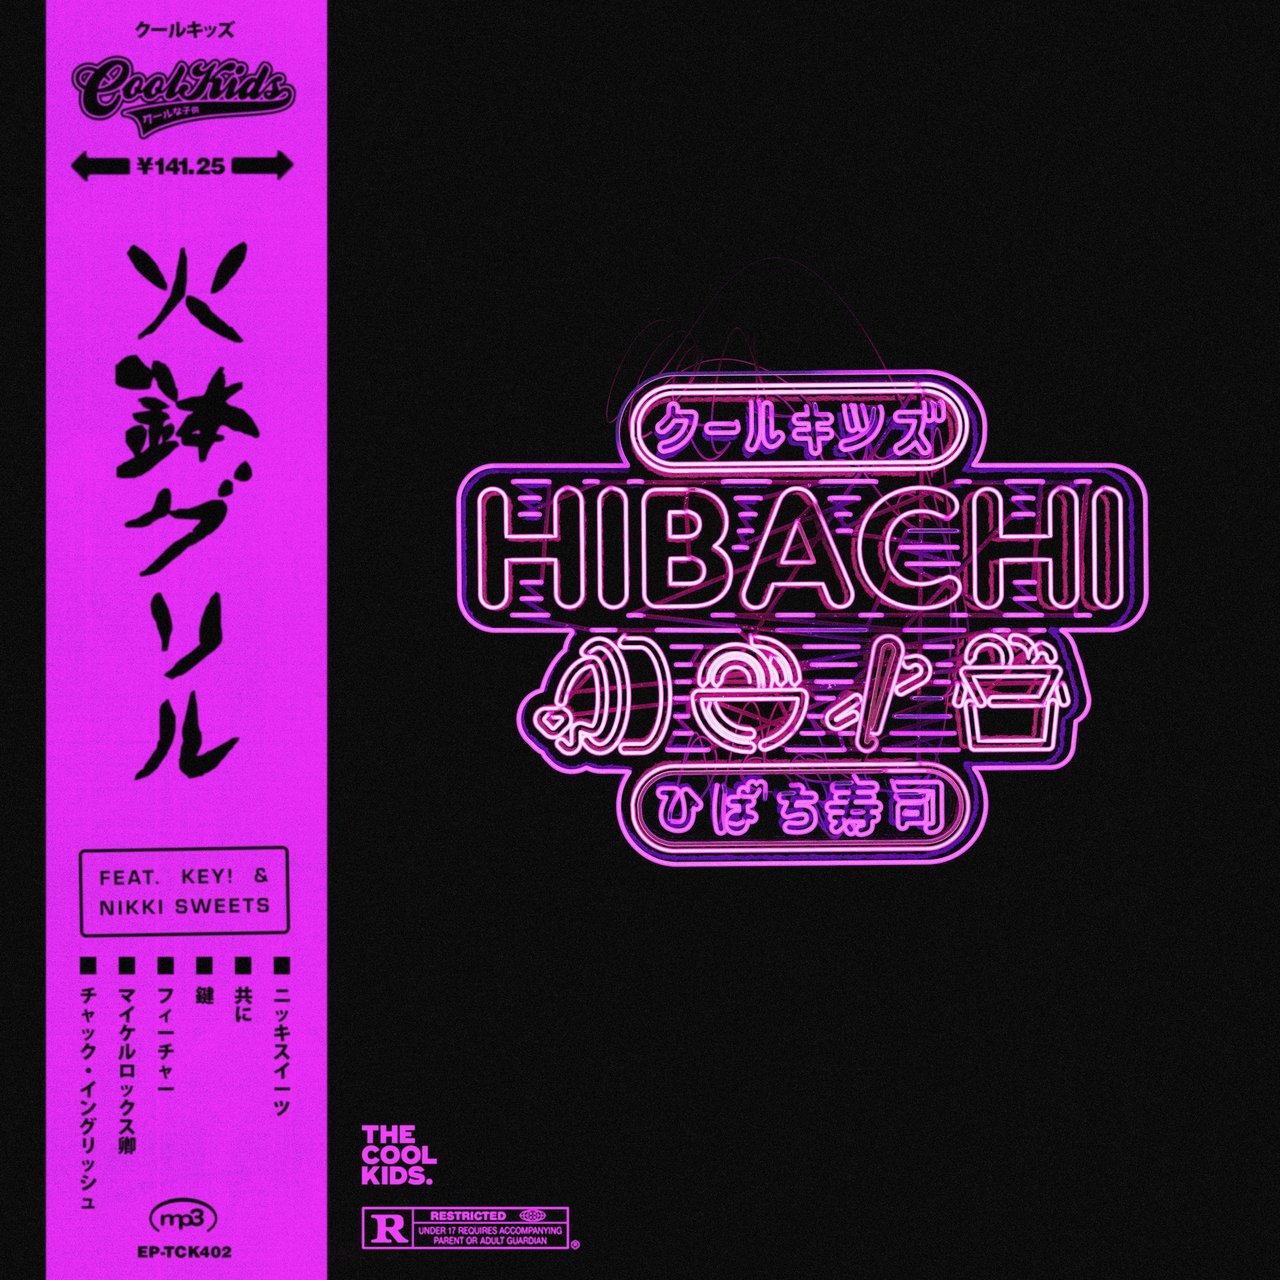 The Cool Kids Tap Key! & Nikki Sweets For Their Rambunctious New Single “Hibachi”